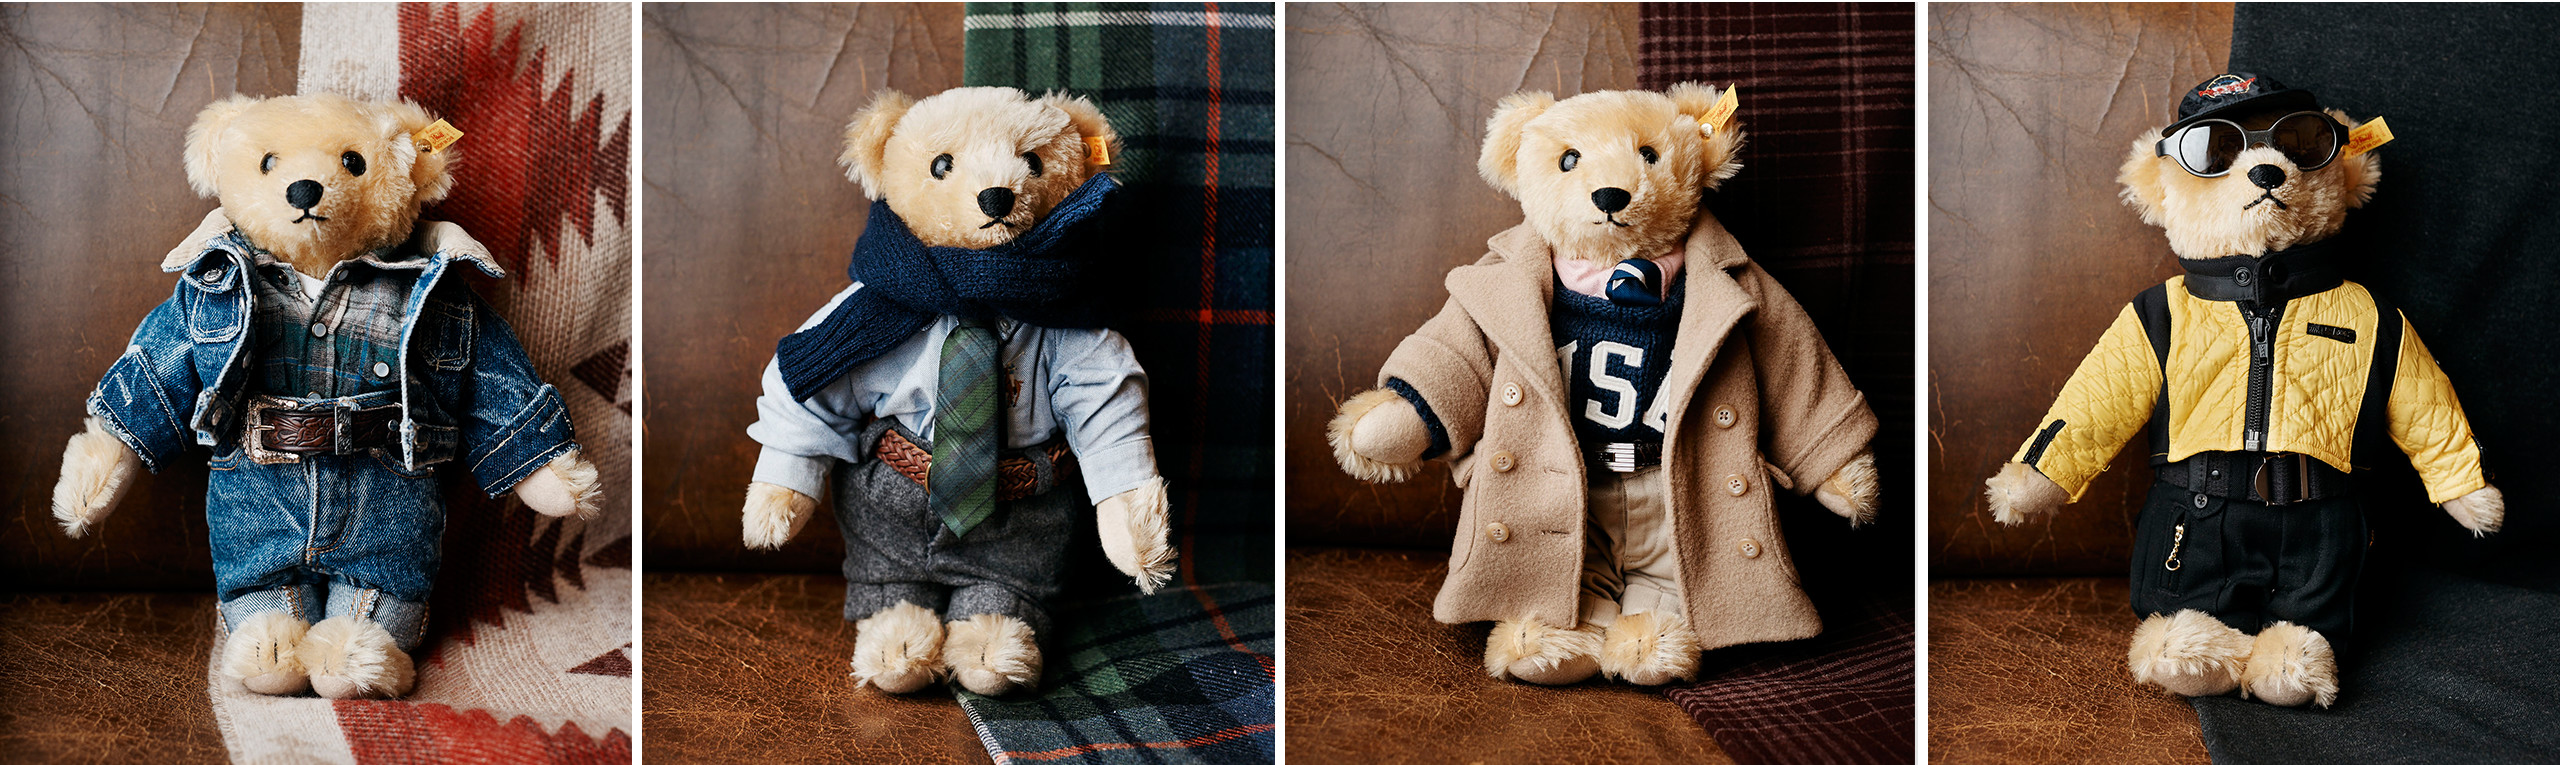 RL Mag - The Best-Dressed Bear in the World